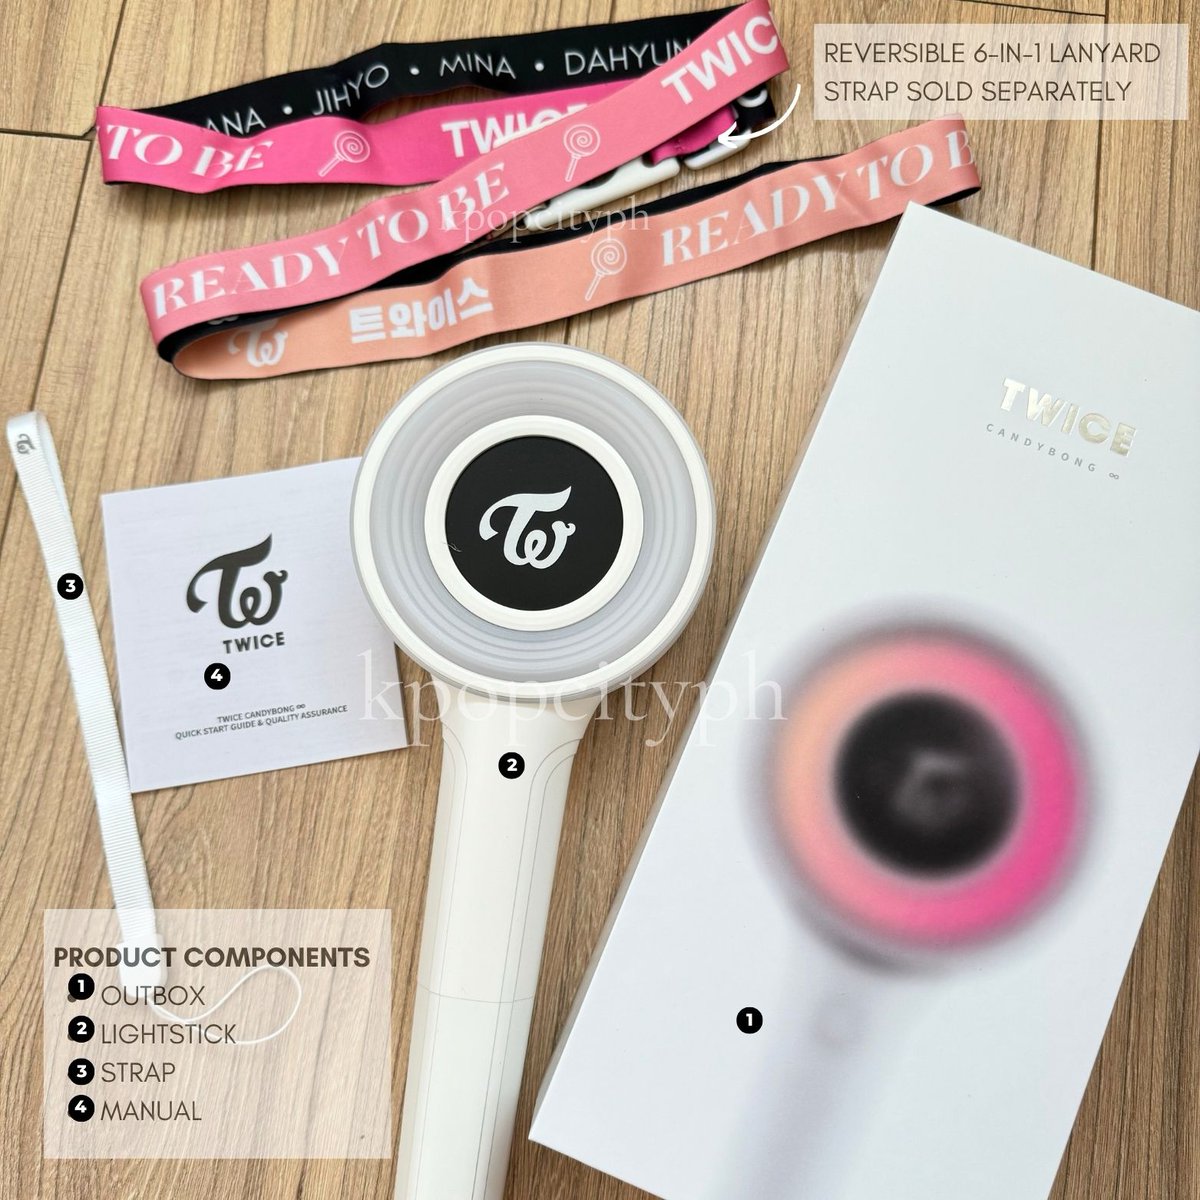 [ON-HAND] TWICE Official Lightstick ver 3 CANDYBONG INFINITY💗 BRAND NEW, SEALED lightstick holder avail! 🚛SDD GGX DM us!✨🌃 #KPOPCityFinds #TWICE #TwicexOishiSnacktacularFanMeet #TWICE_5TH_WORLD_TOUR_READY_TO_BE_in_JAPAN_SPECIAL Wts lfb ph for sale cbi con rtb once fanmeet